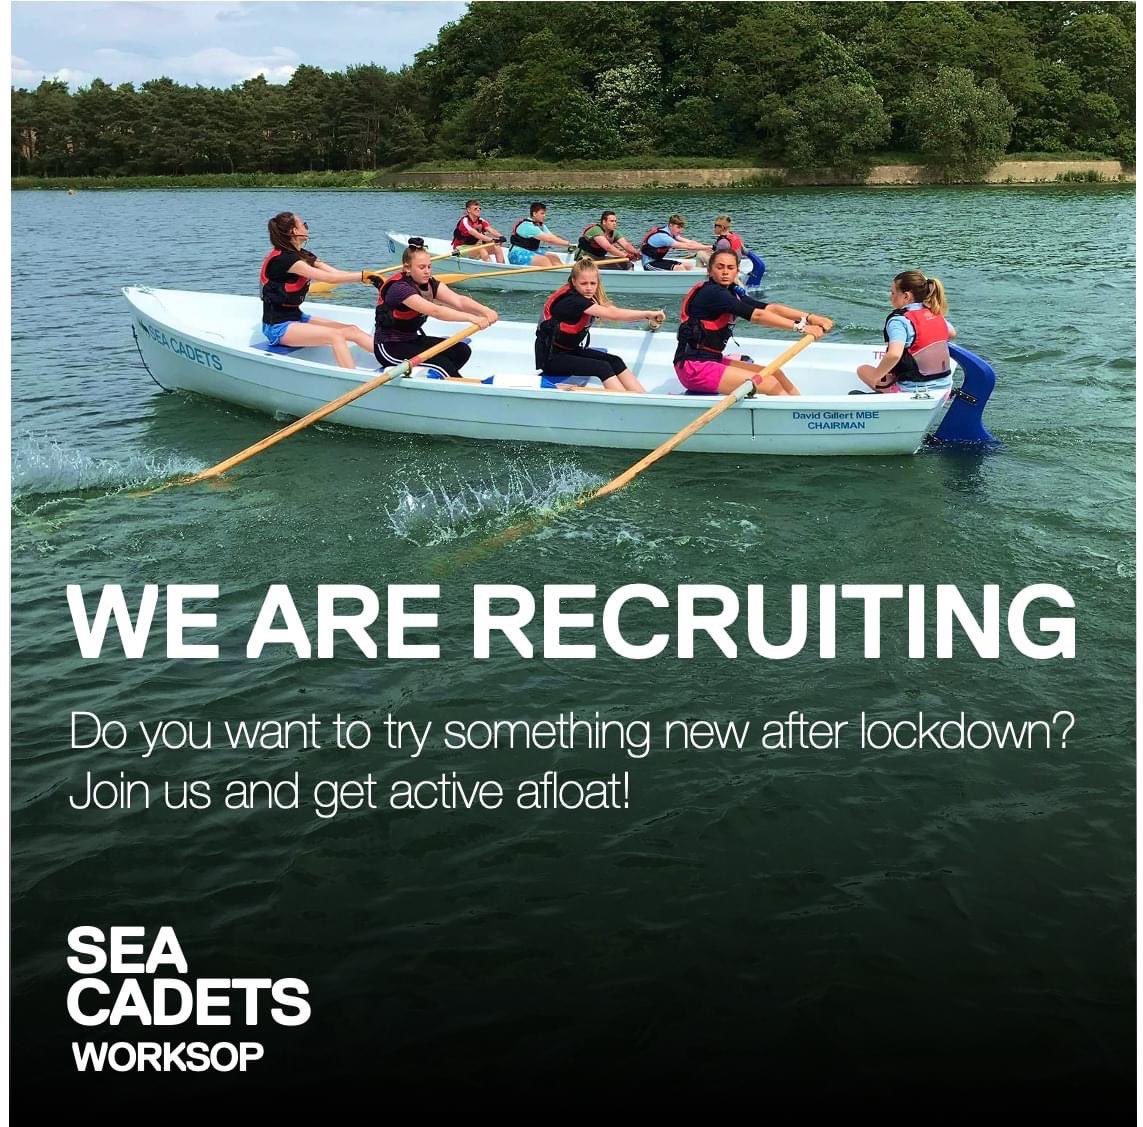 Aged 10-18? Do you want to try something new after lockdown? Join us and get active afloat! Ready to get your head start in life? Apply now 👉sea-cadets.org/apply Email: info@worksopseacadets.co.uk or message us for more information. #TeamBentinck #AdventureAwaits